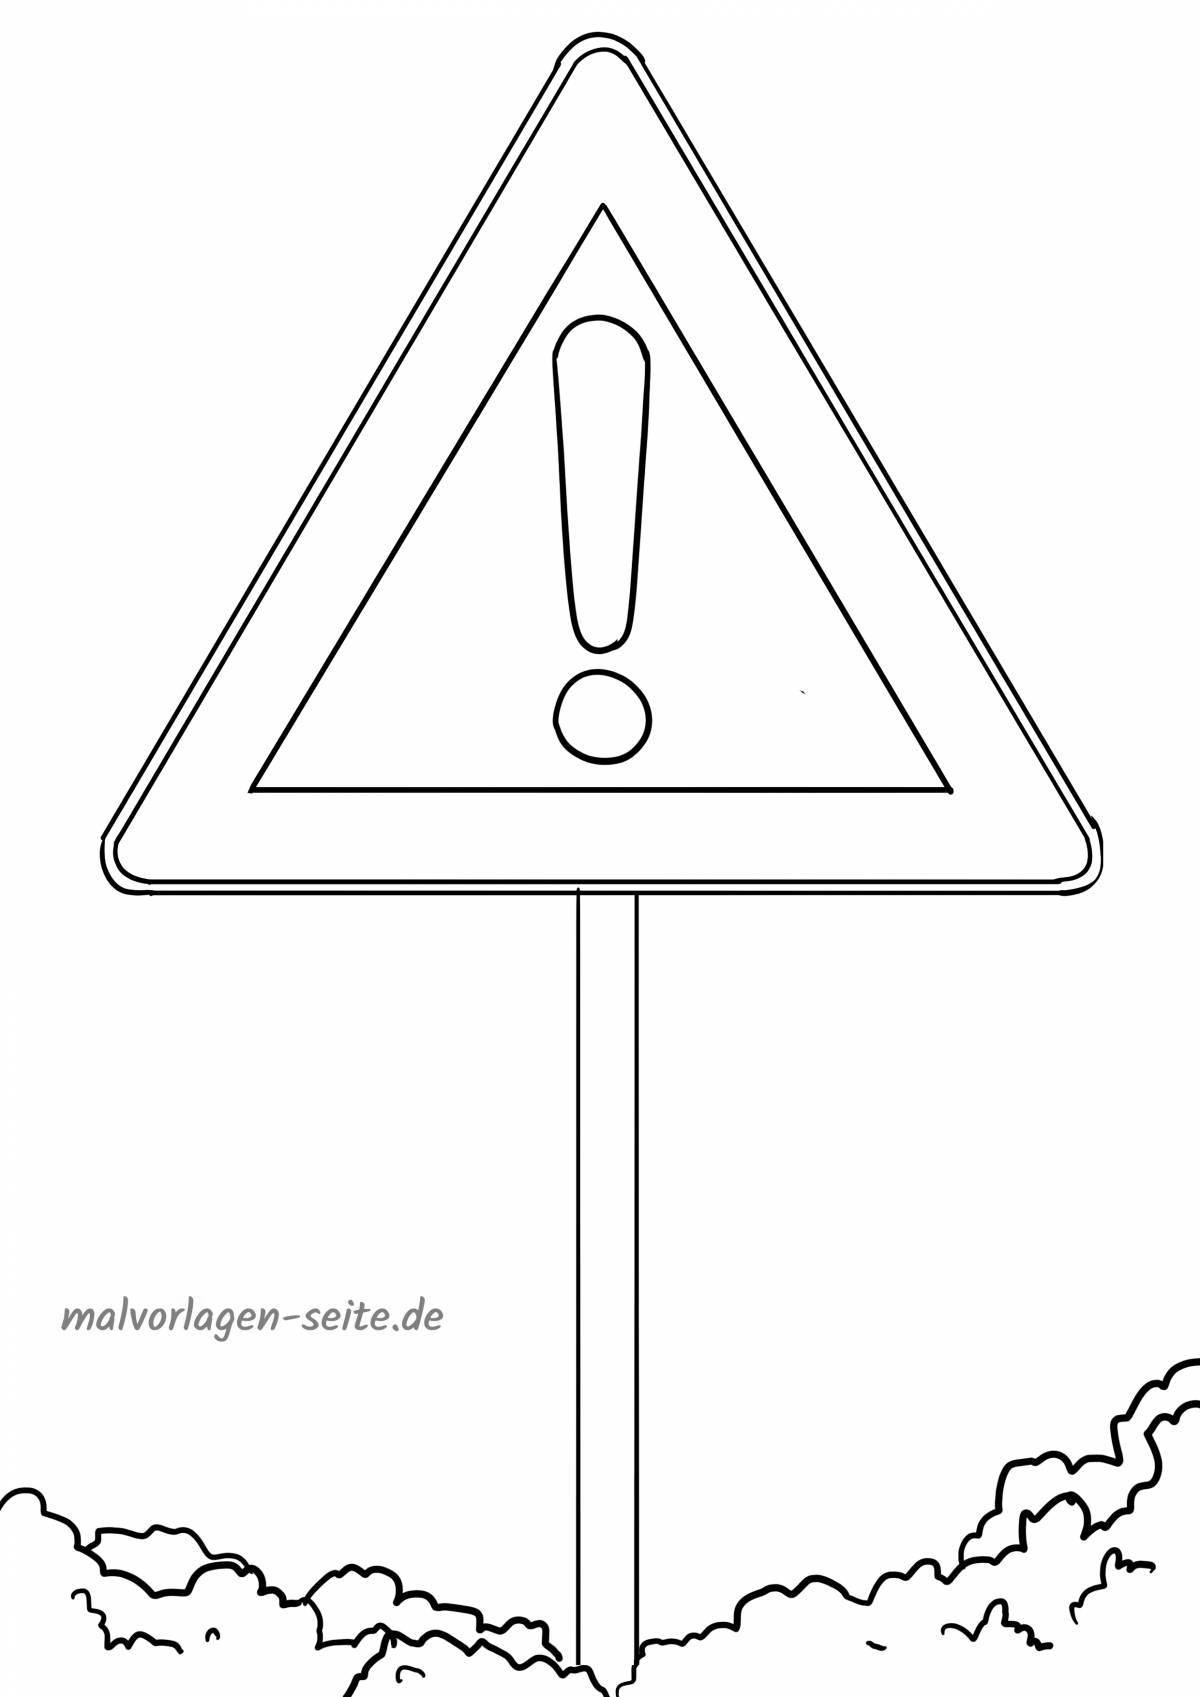 Coloring page glowing safety sign